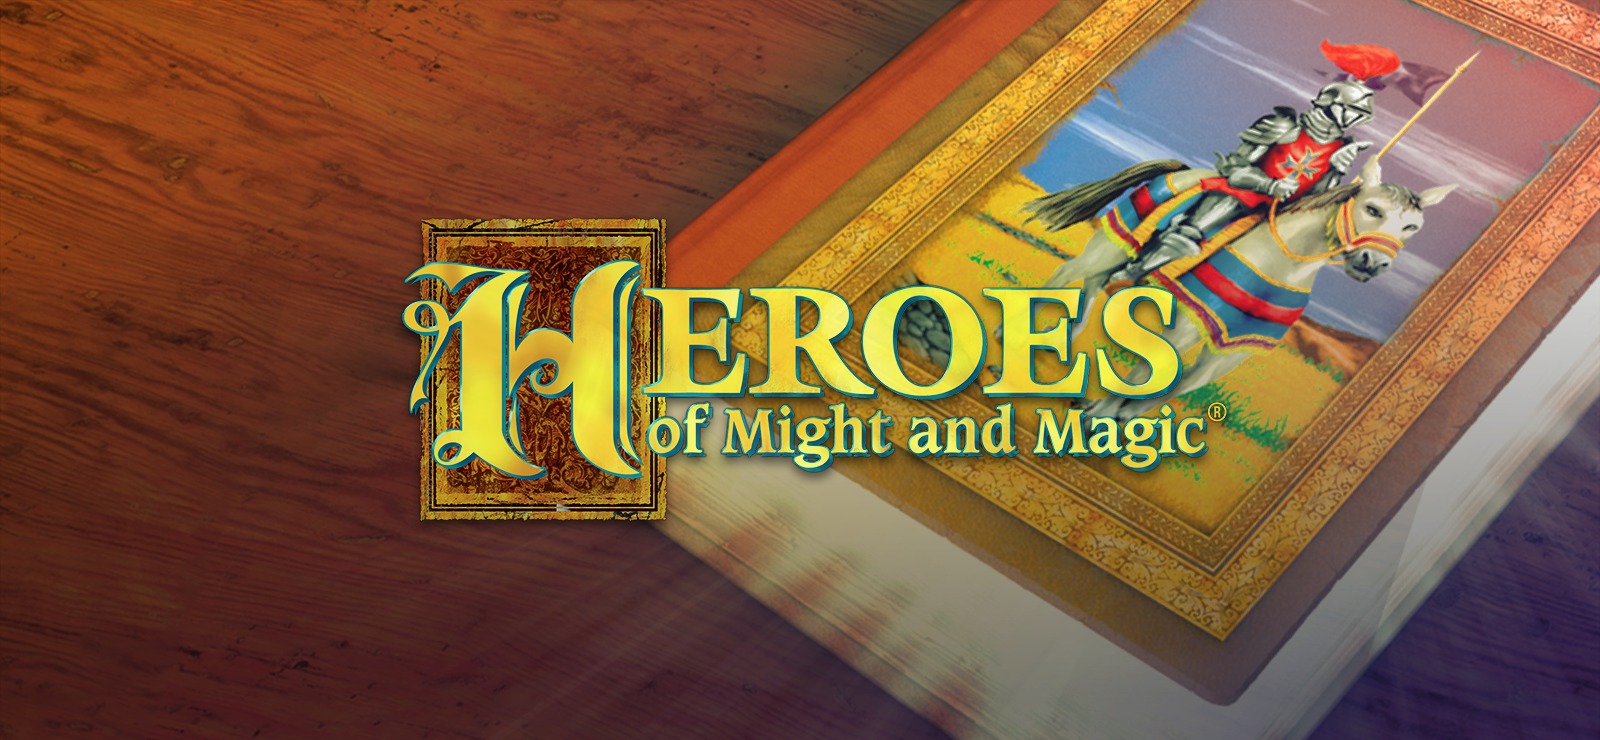 Heroes of Might and Magic (v.1.2 (1.1) build 33754) + Multiplayer + Bonus [GOG]